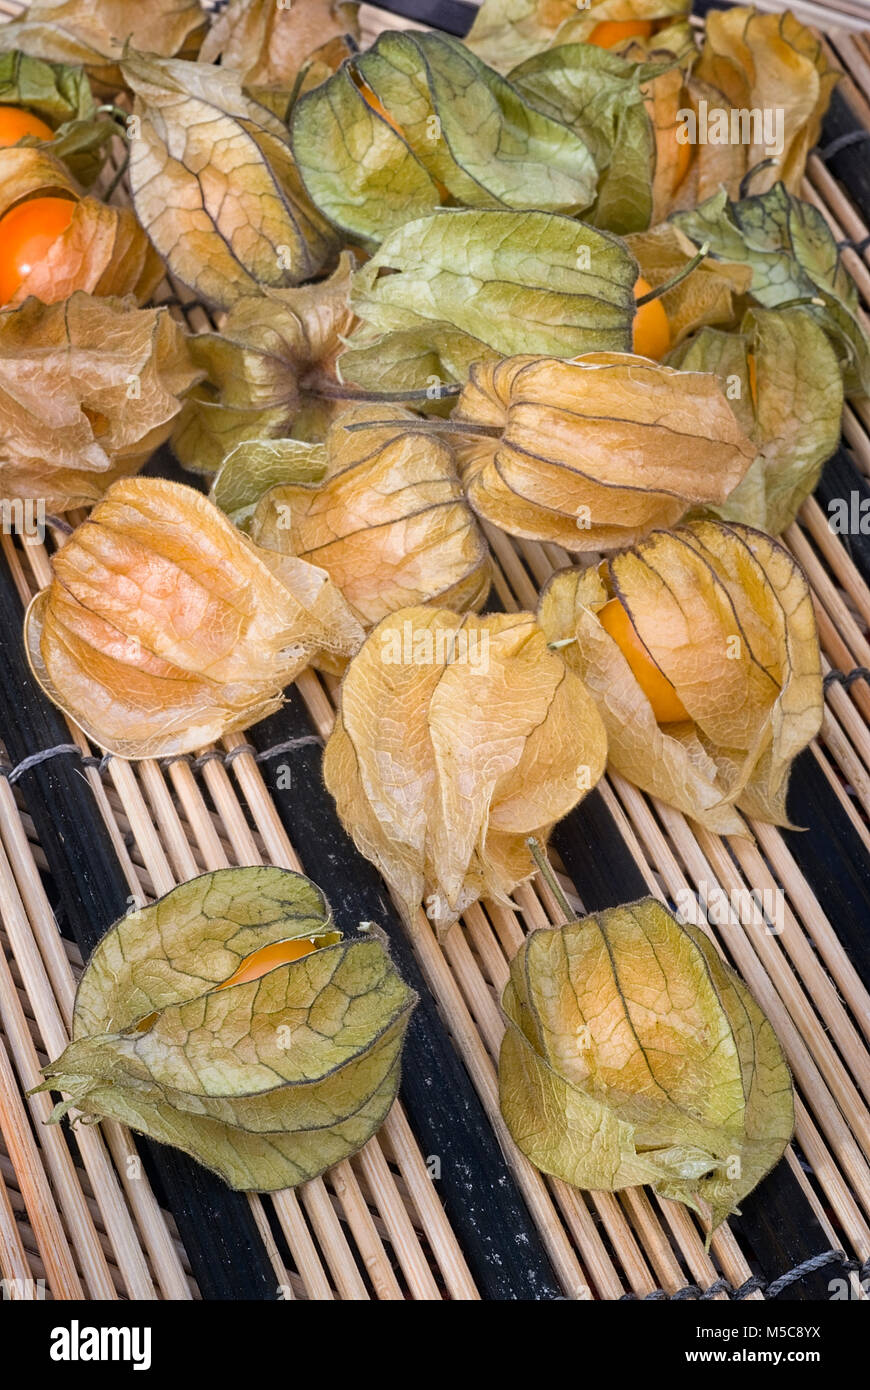 Physalis fruit (Physalis peruviana) also called Cape gooseberry, Uchuva or gold berries. Plant with edible fruit native of Perù. Stock Photo